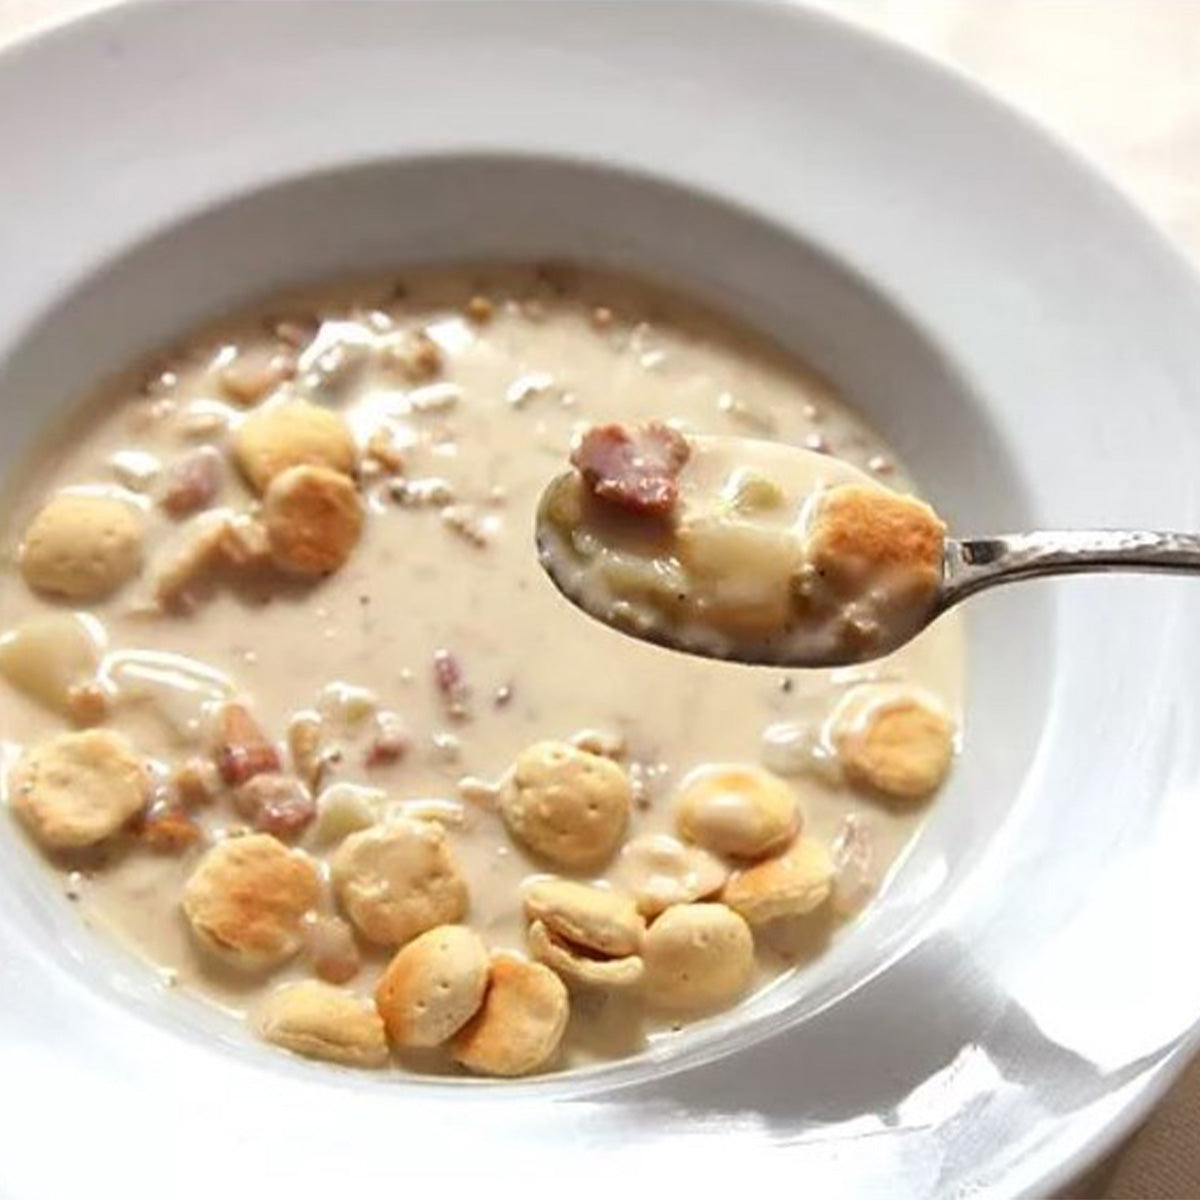 Bowl of clam chowder soup